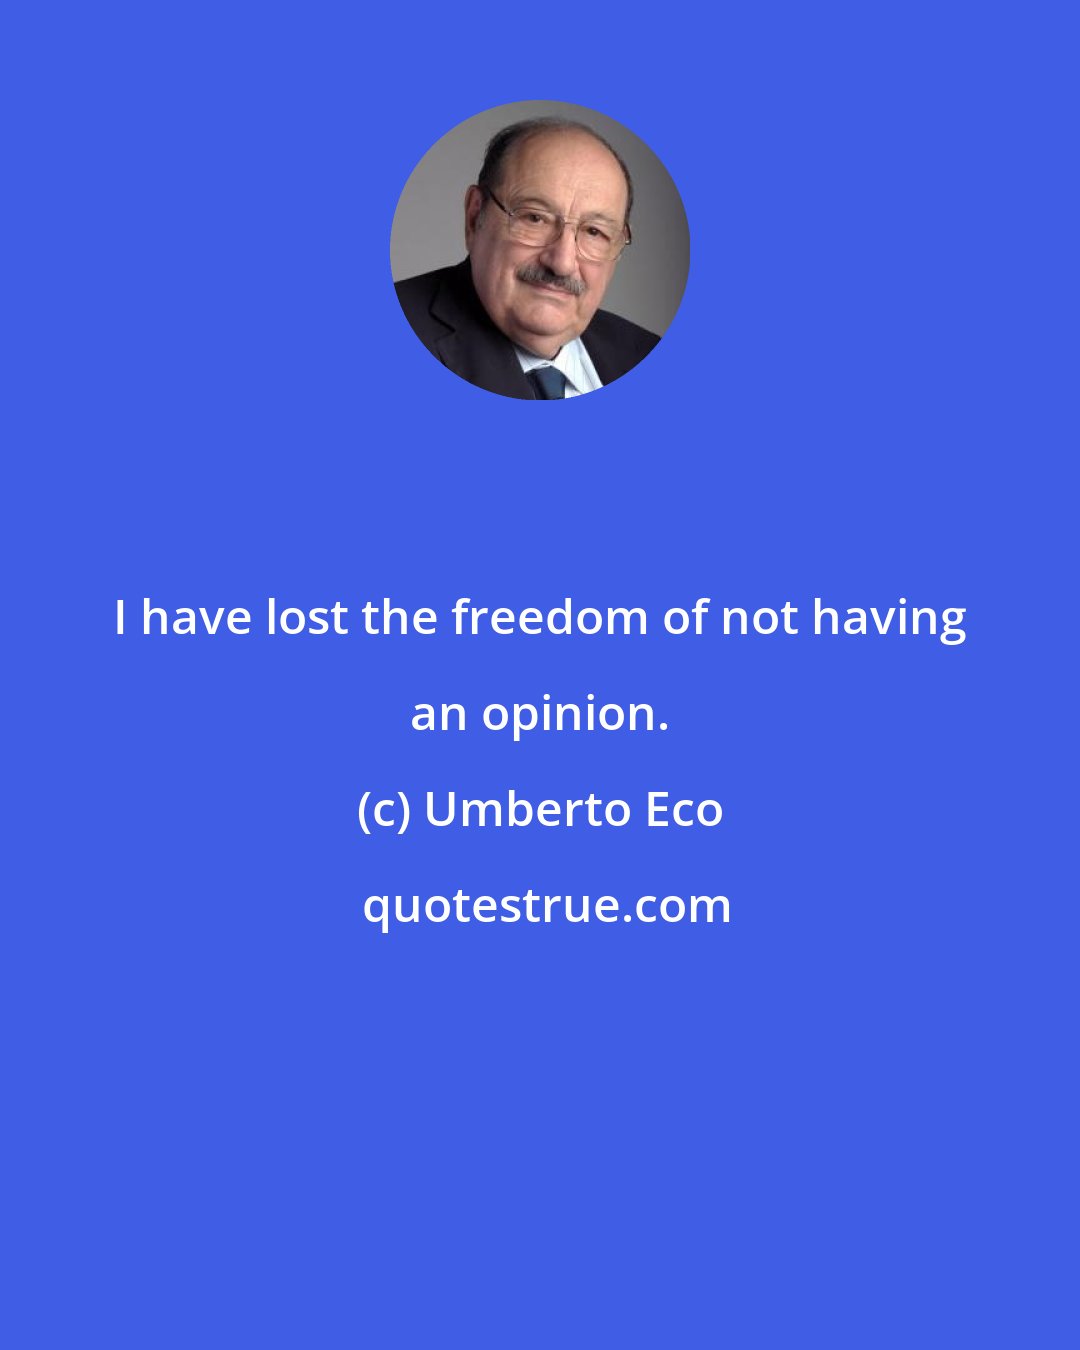 Umberto Eco: I have lost the freedom of not having an opinion.